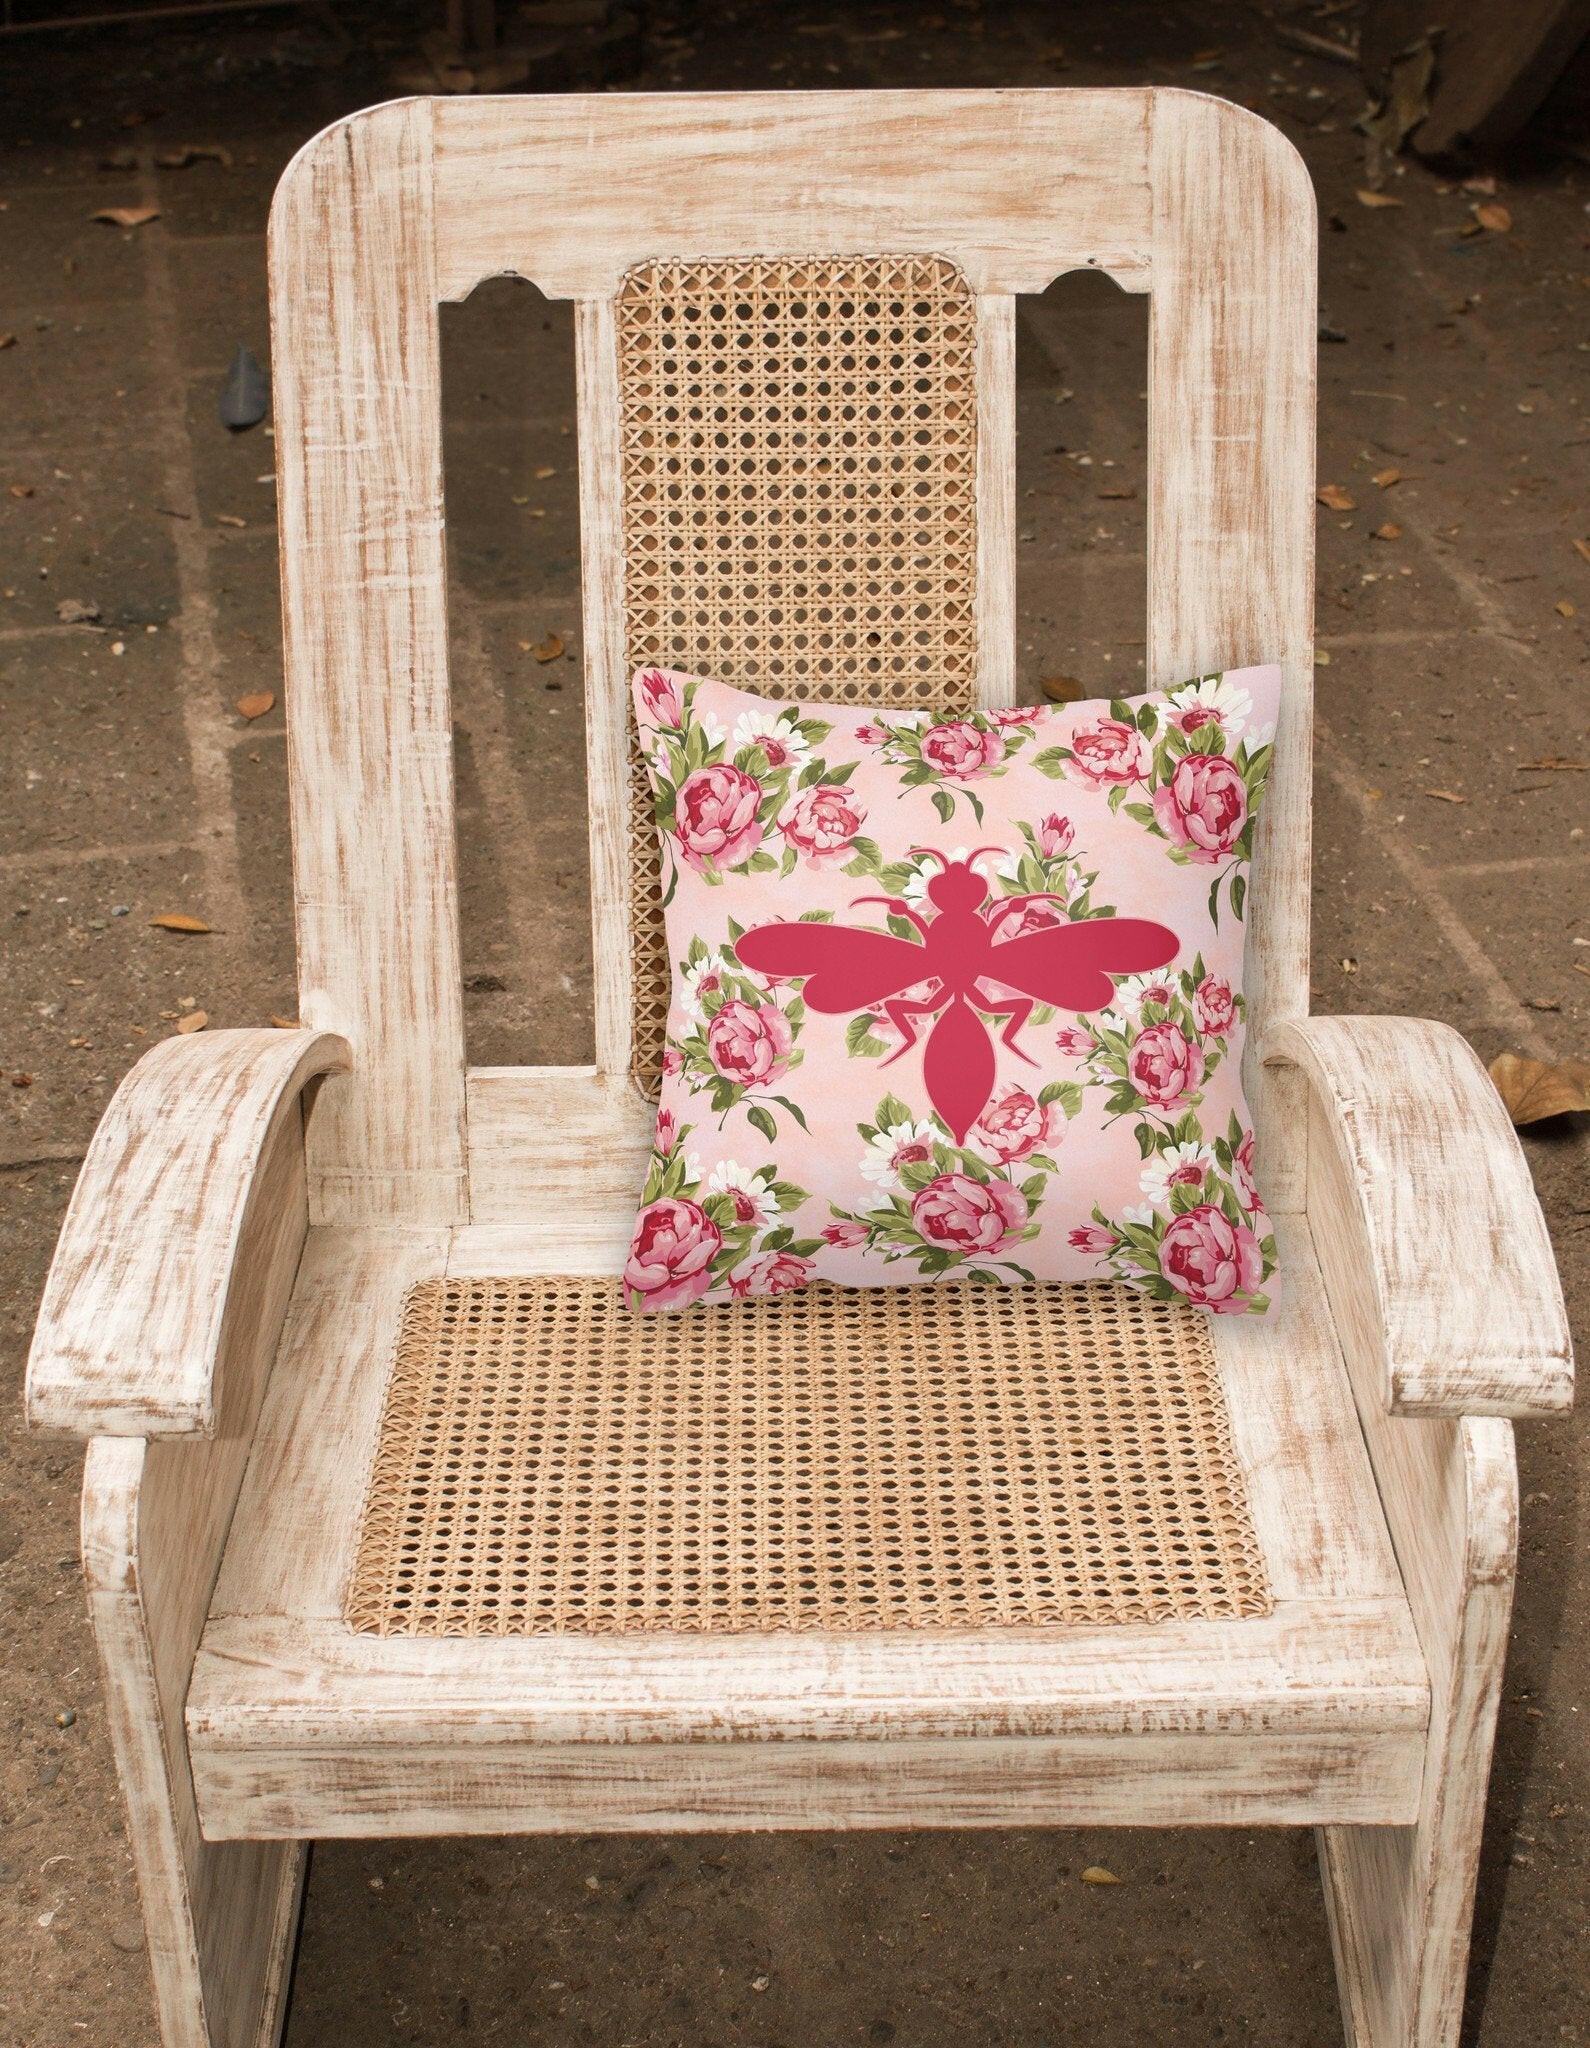 Wasp Shabby Chic Pink Roses  Fabric Decorative Pillow BB1054-RS-PK-PW1414 - the-store.com